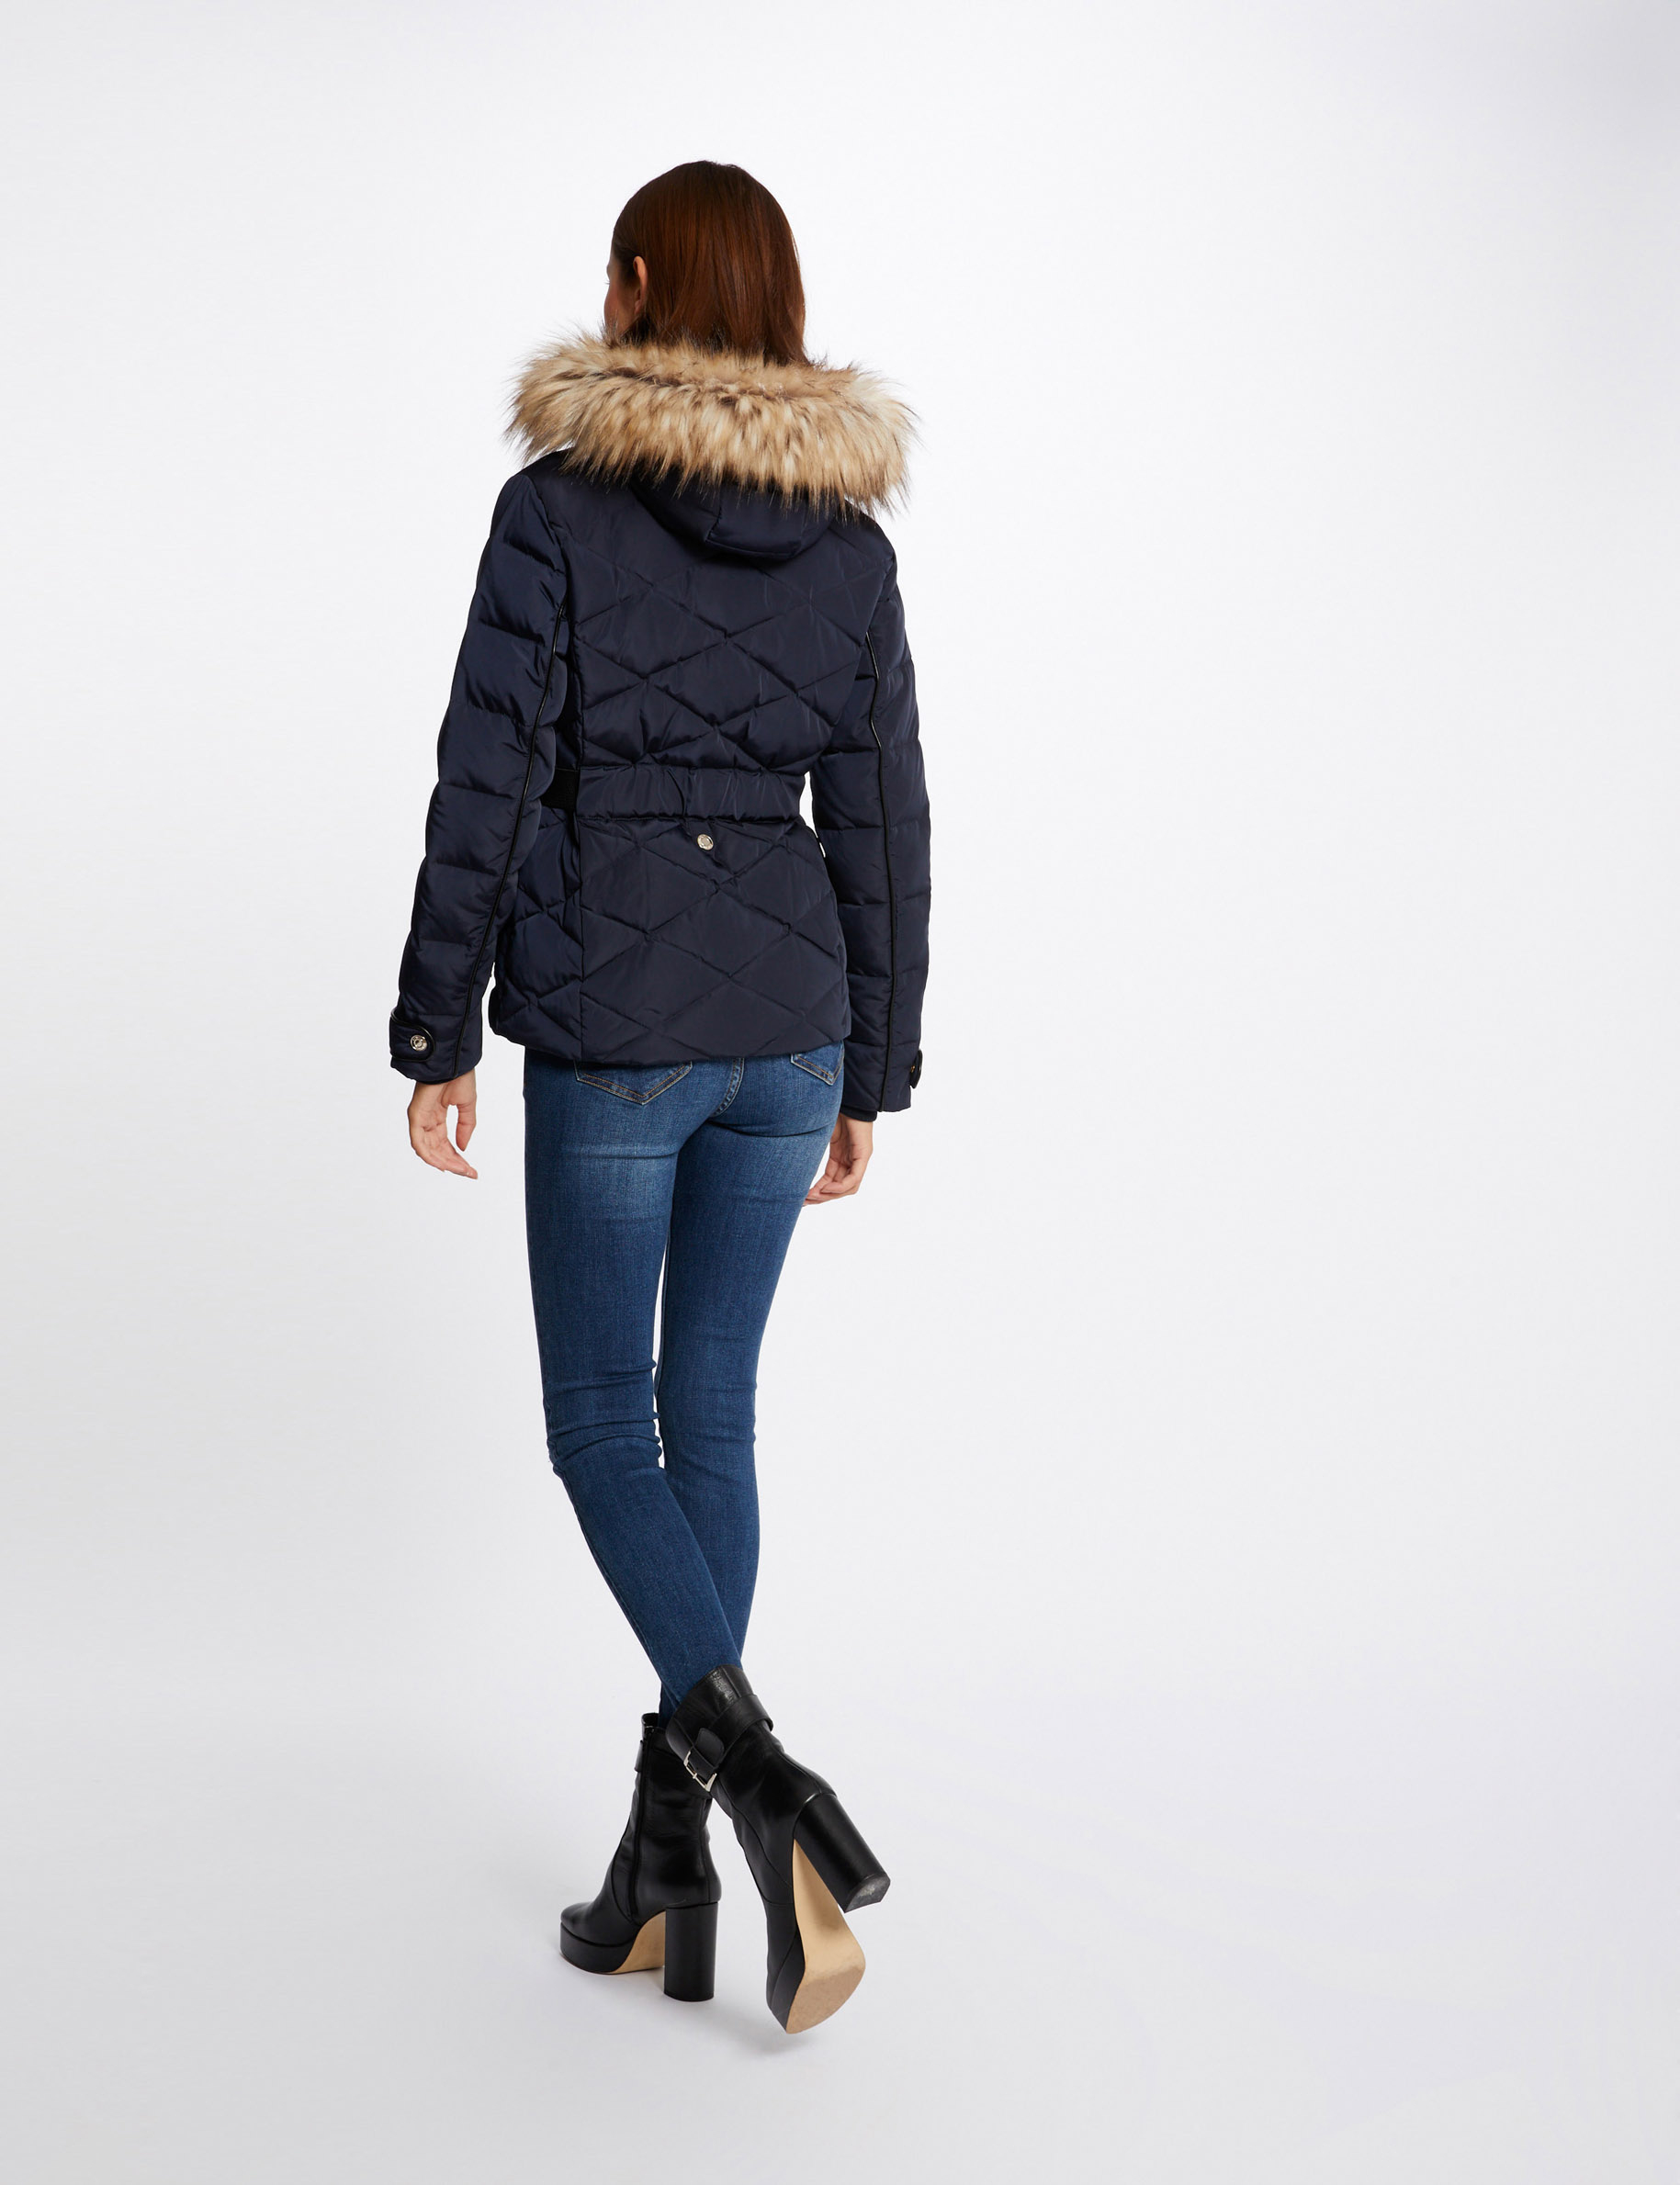 Straight belted padded jacket with hood navy ladies'